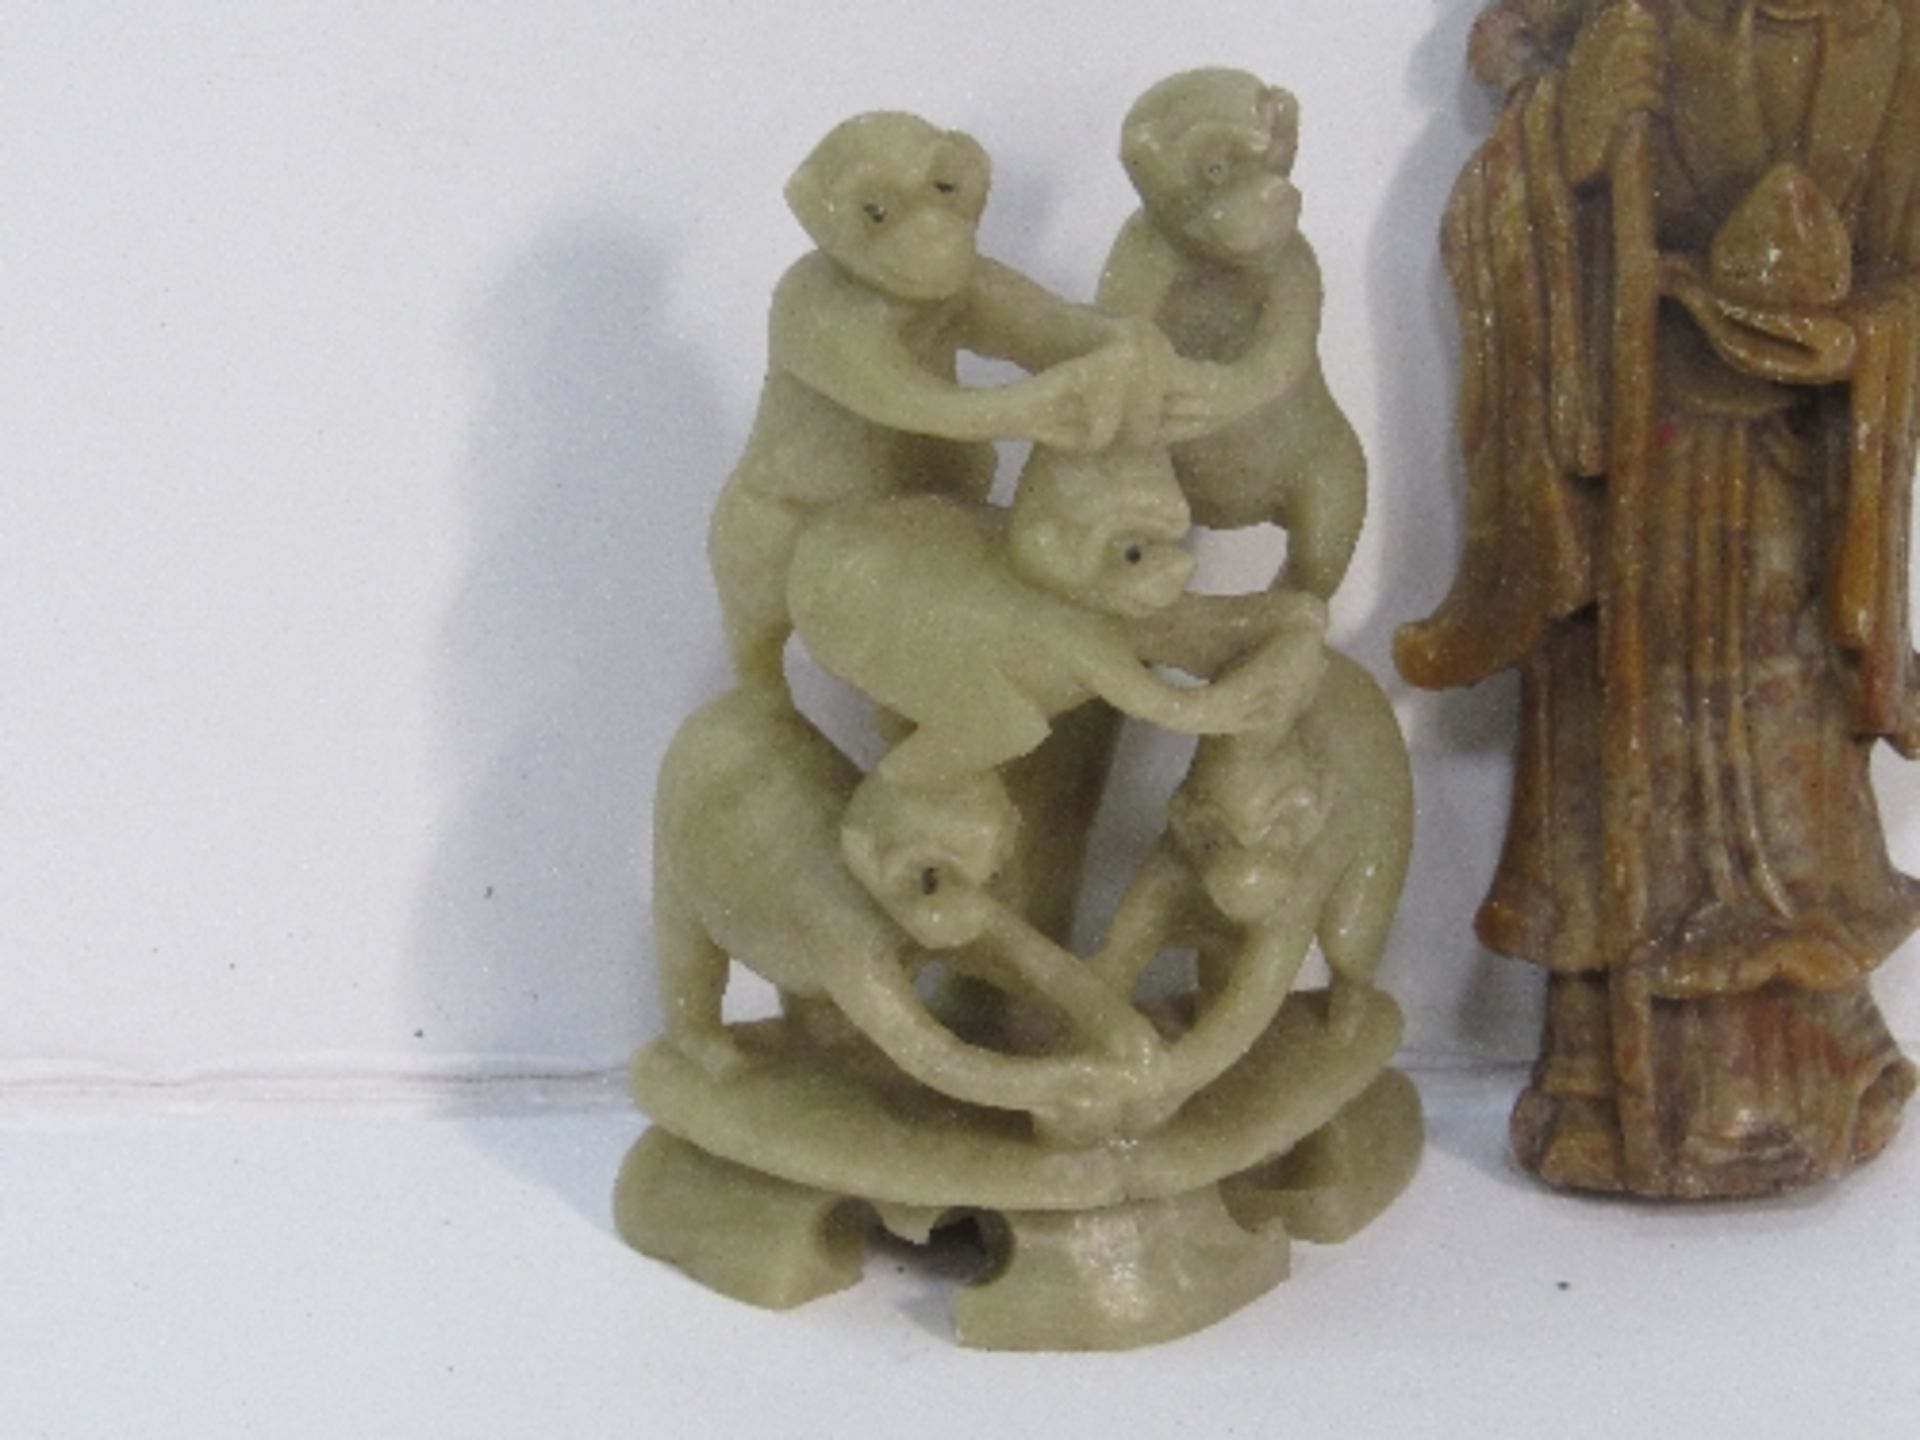 2 oriental stone carved figurines: 1 of an old gentleman & the other a group of monkeys; - Image 2 of 3